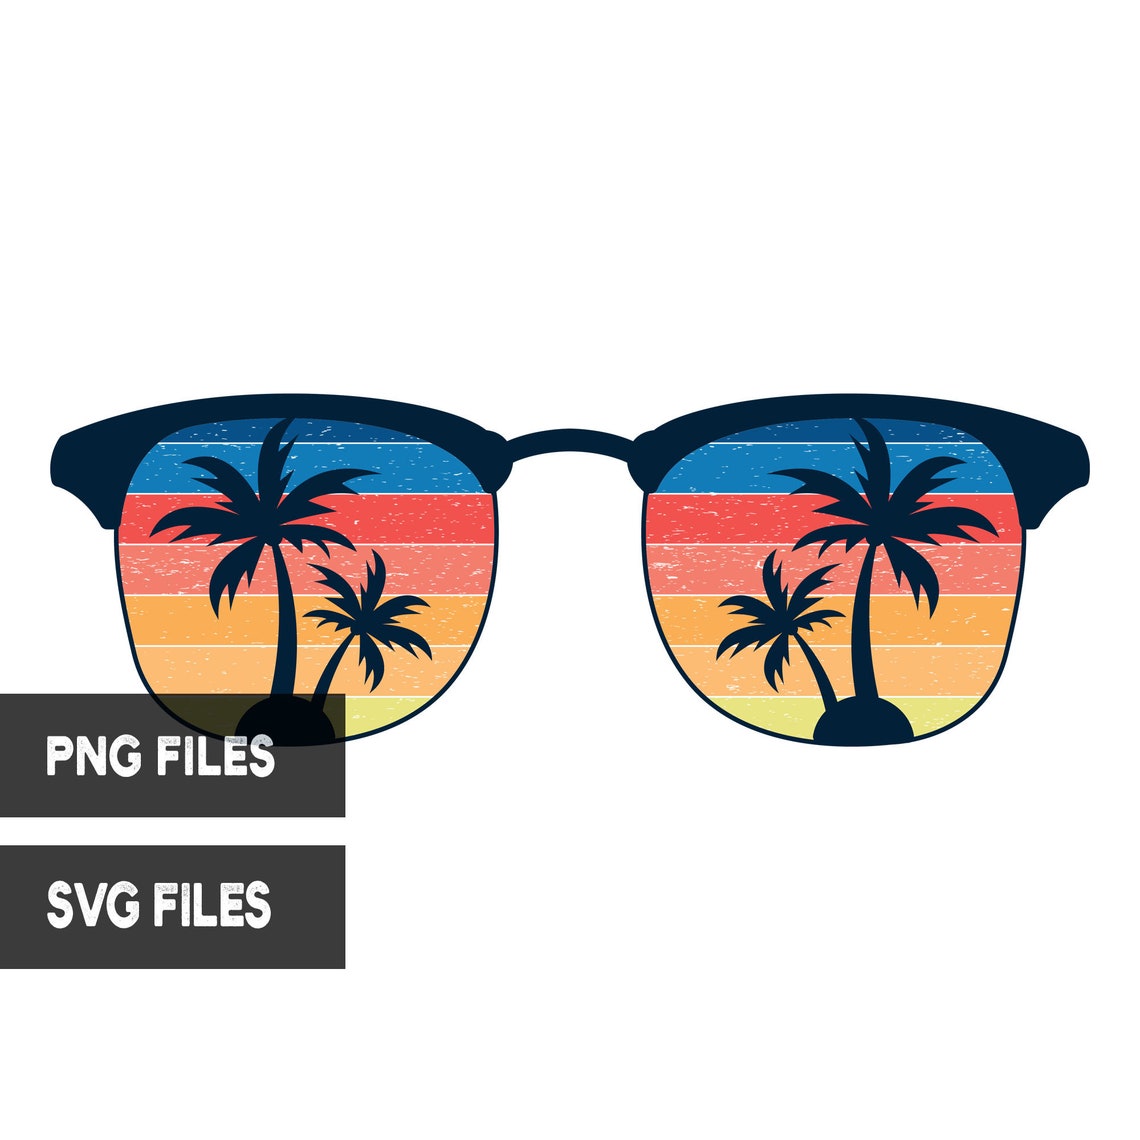 Sunglasses Retro Sunset Palm Trees PNG and SVG Cut Files | Etsy